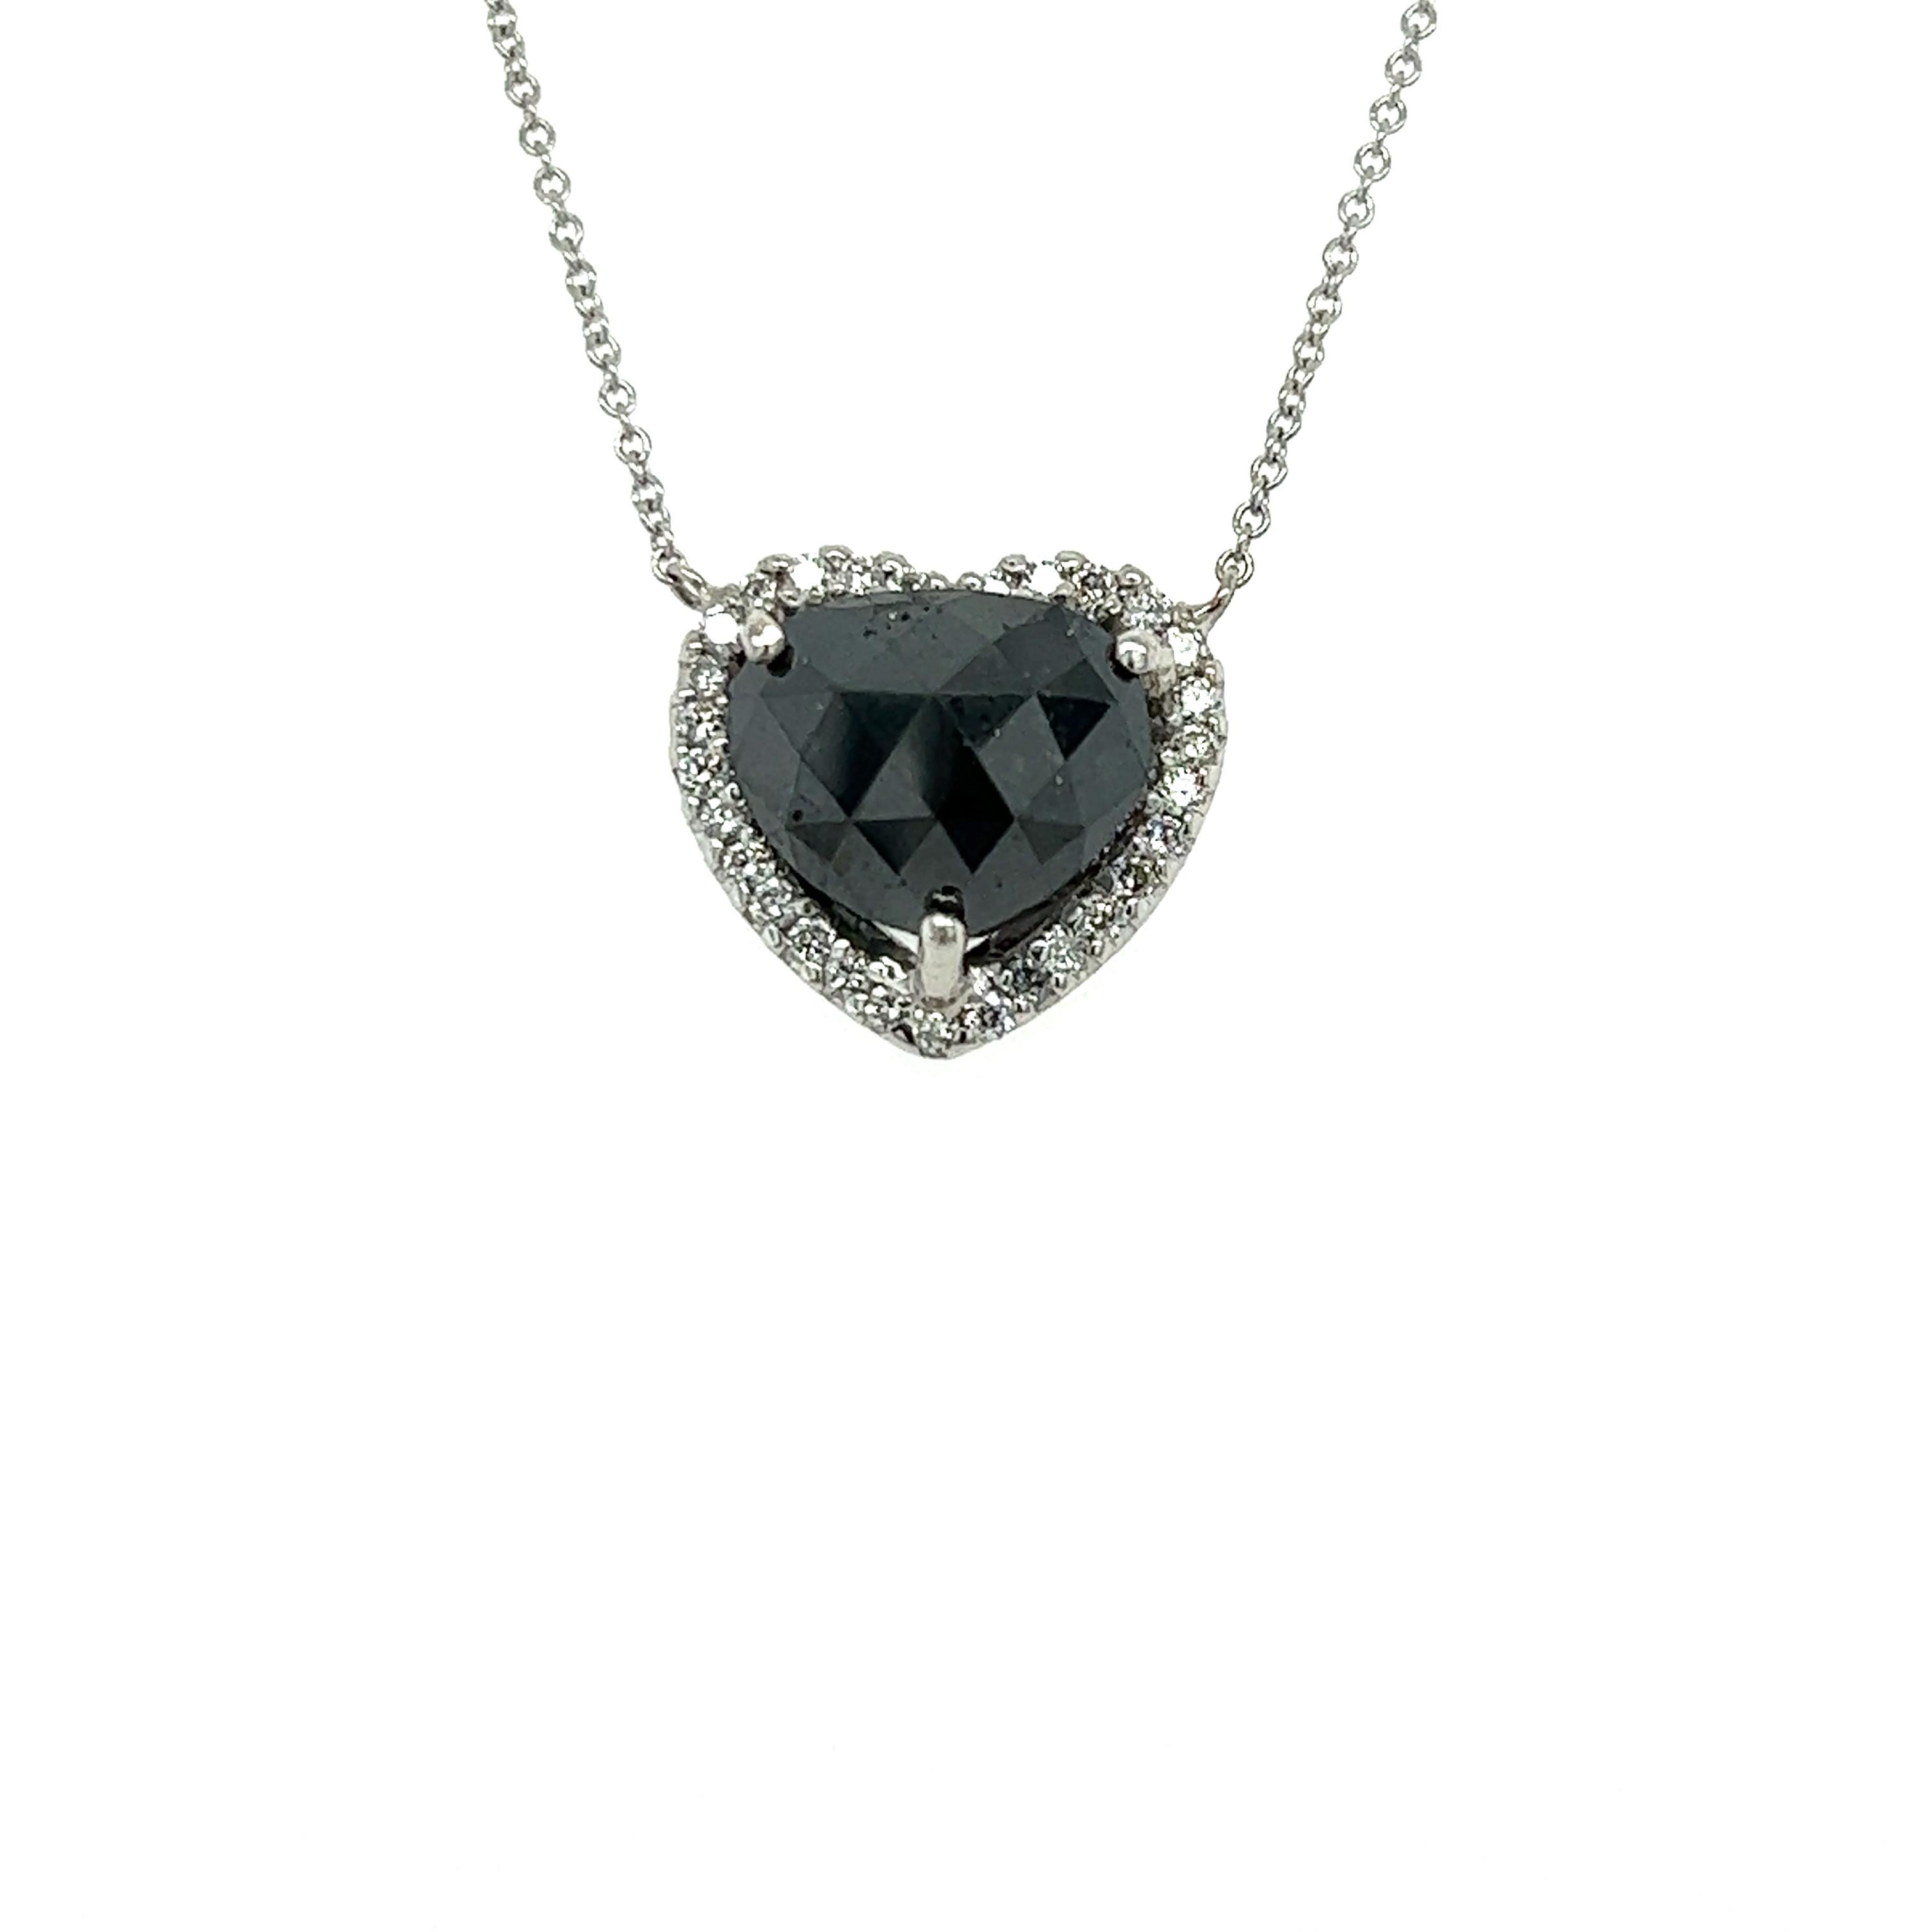 This beautiful necklace has a Natural Black Diamond that weighs 4.79 carats and also Natural Round Cut White Diamonds that weigh 0.32 carats. The black diamond is a wide fancy cut natural black diamond. 
The total carat weight of the necklace is